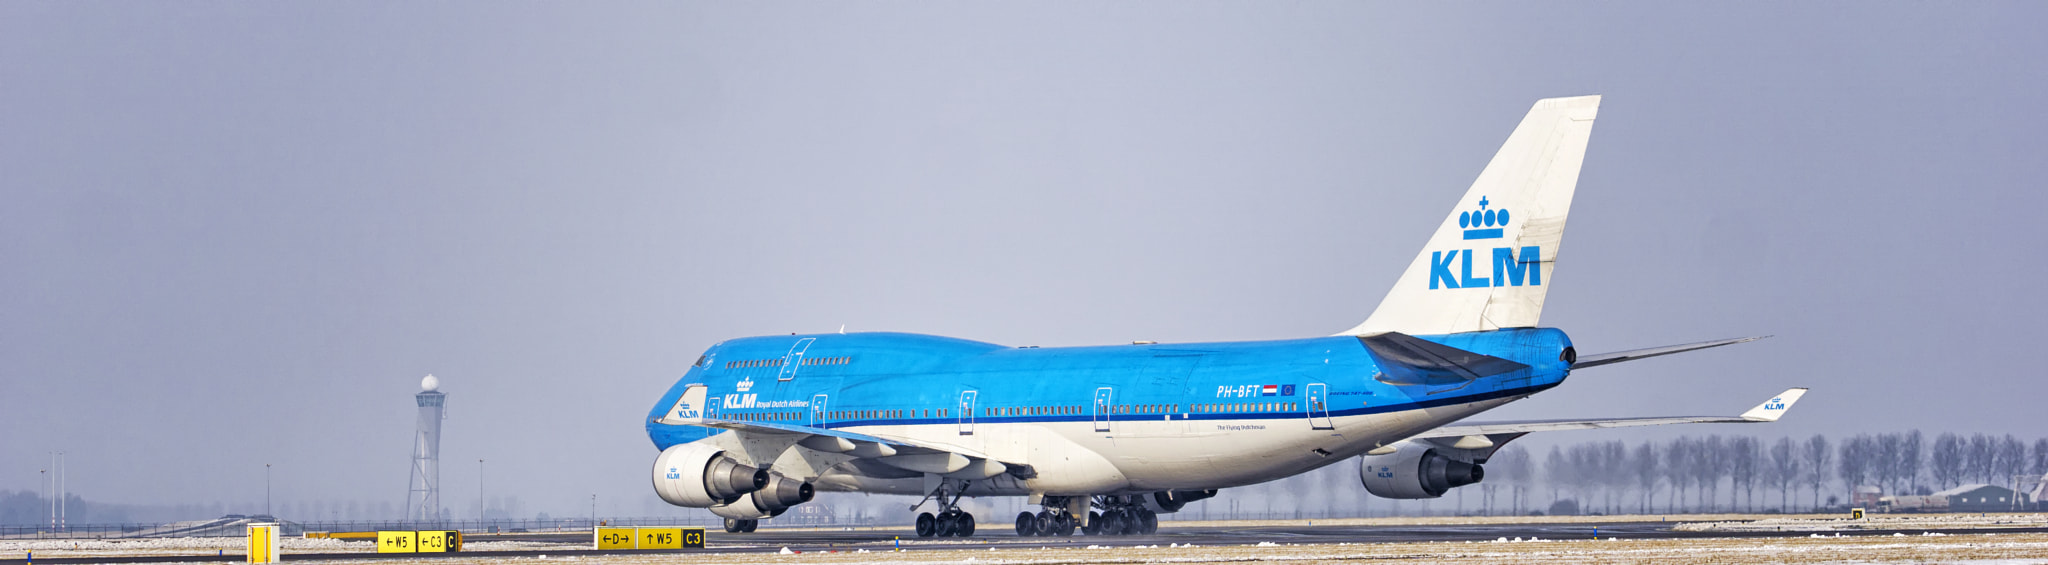 Sony a6000 sample photo. Ph bft klm royal dutch airlines boeing (m) cn photography